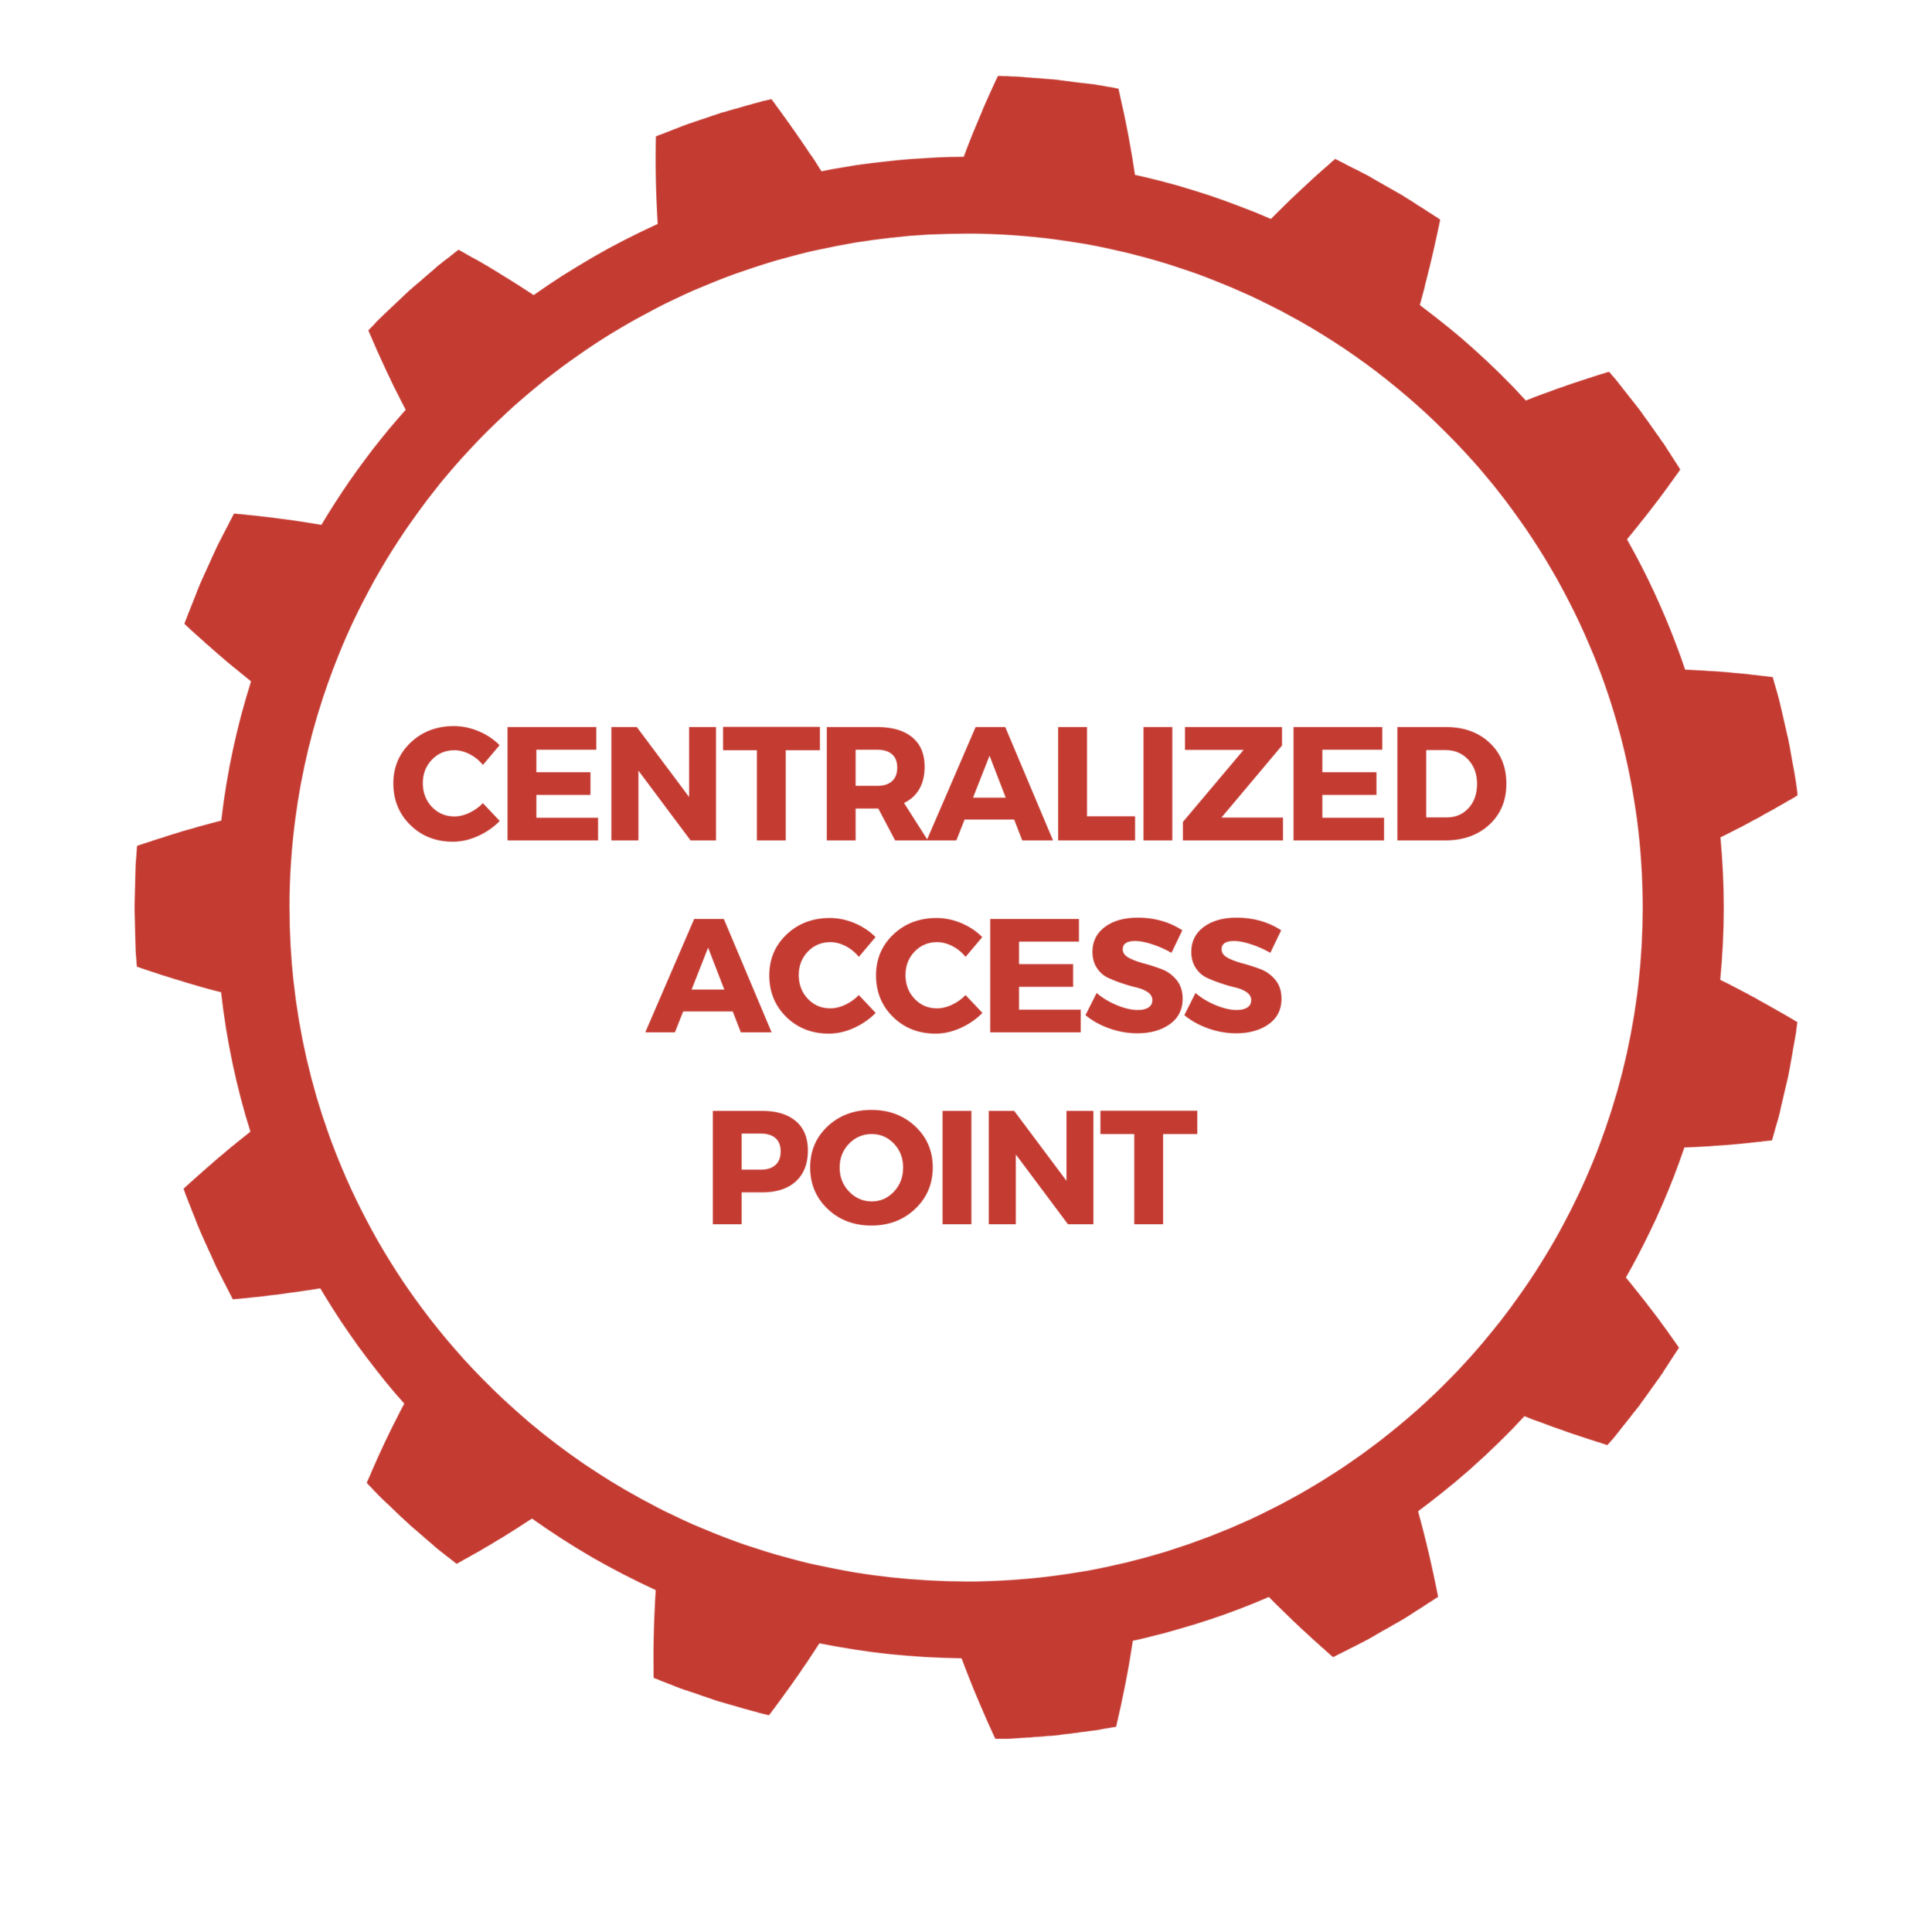  A  Centralized Access Point  assists families and professionals in connecting children to the grid of community resources that help them thrive. 